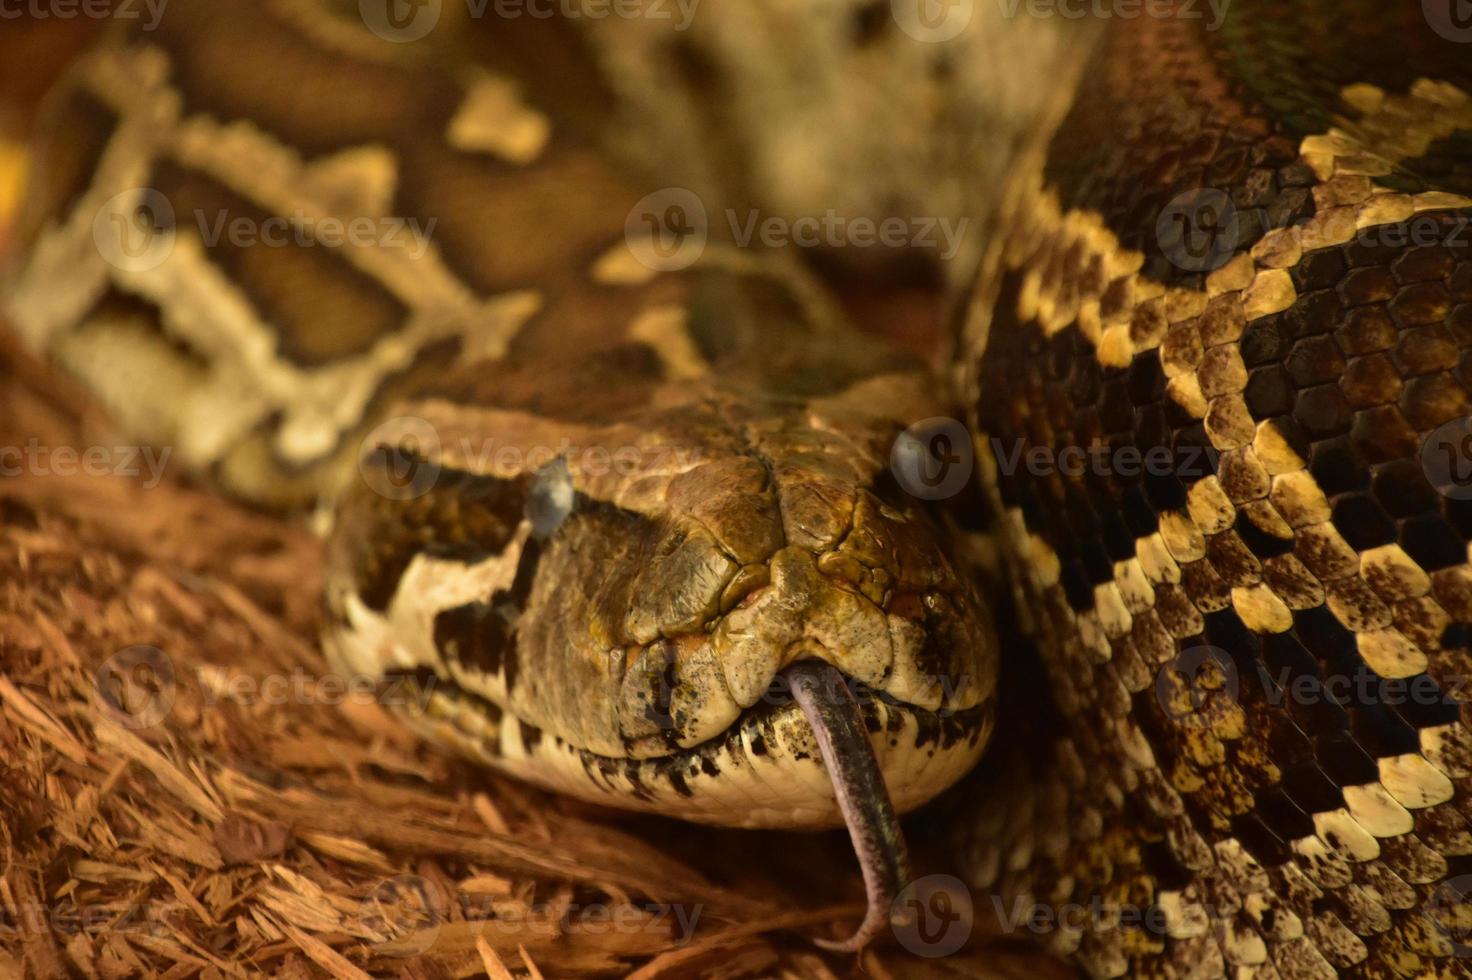 Forked Tongue Sticking Out on a Burmese Python photo